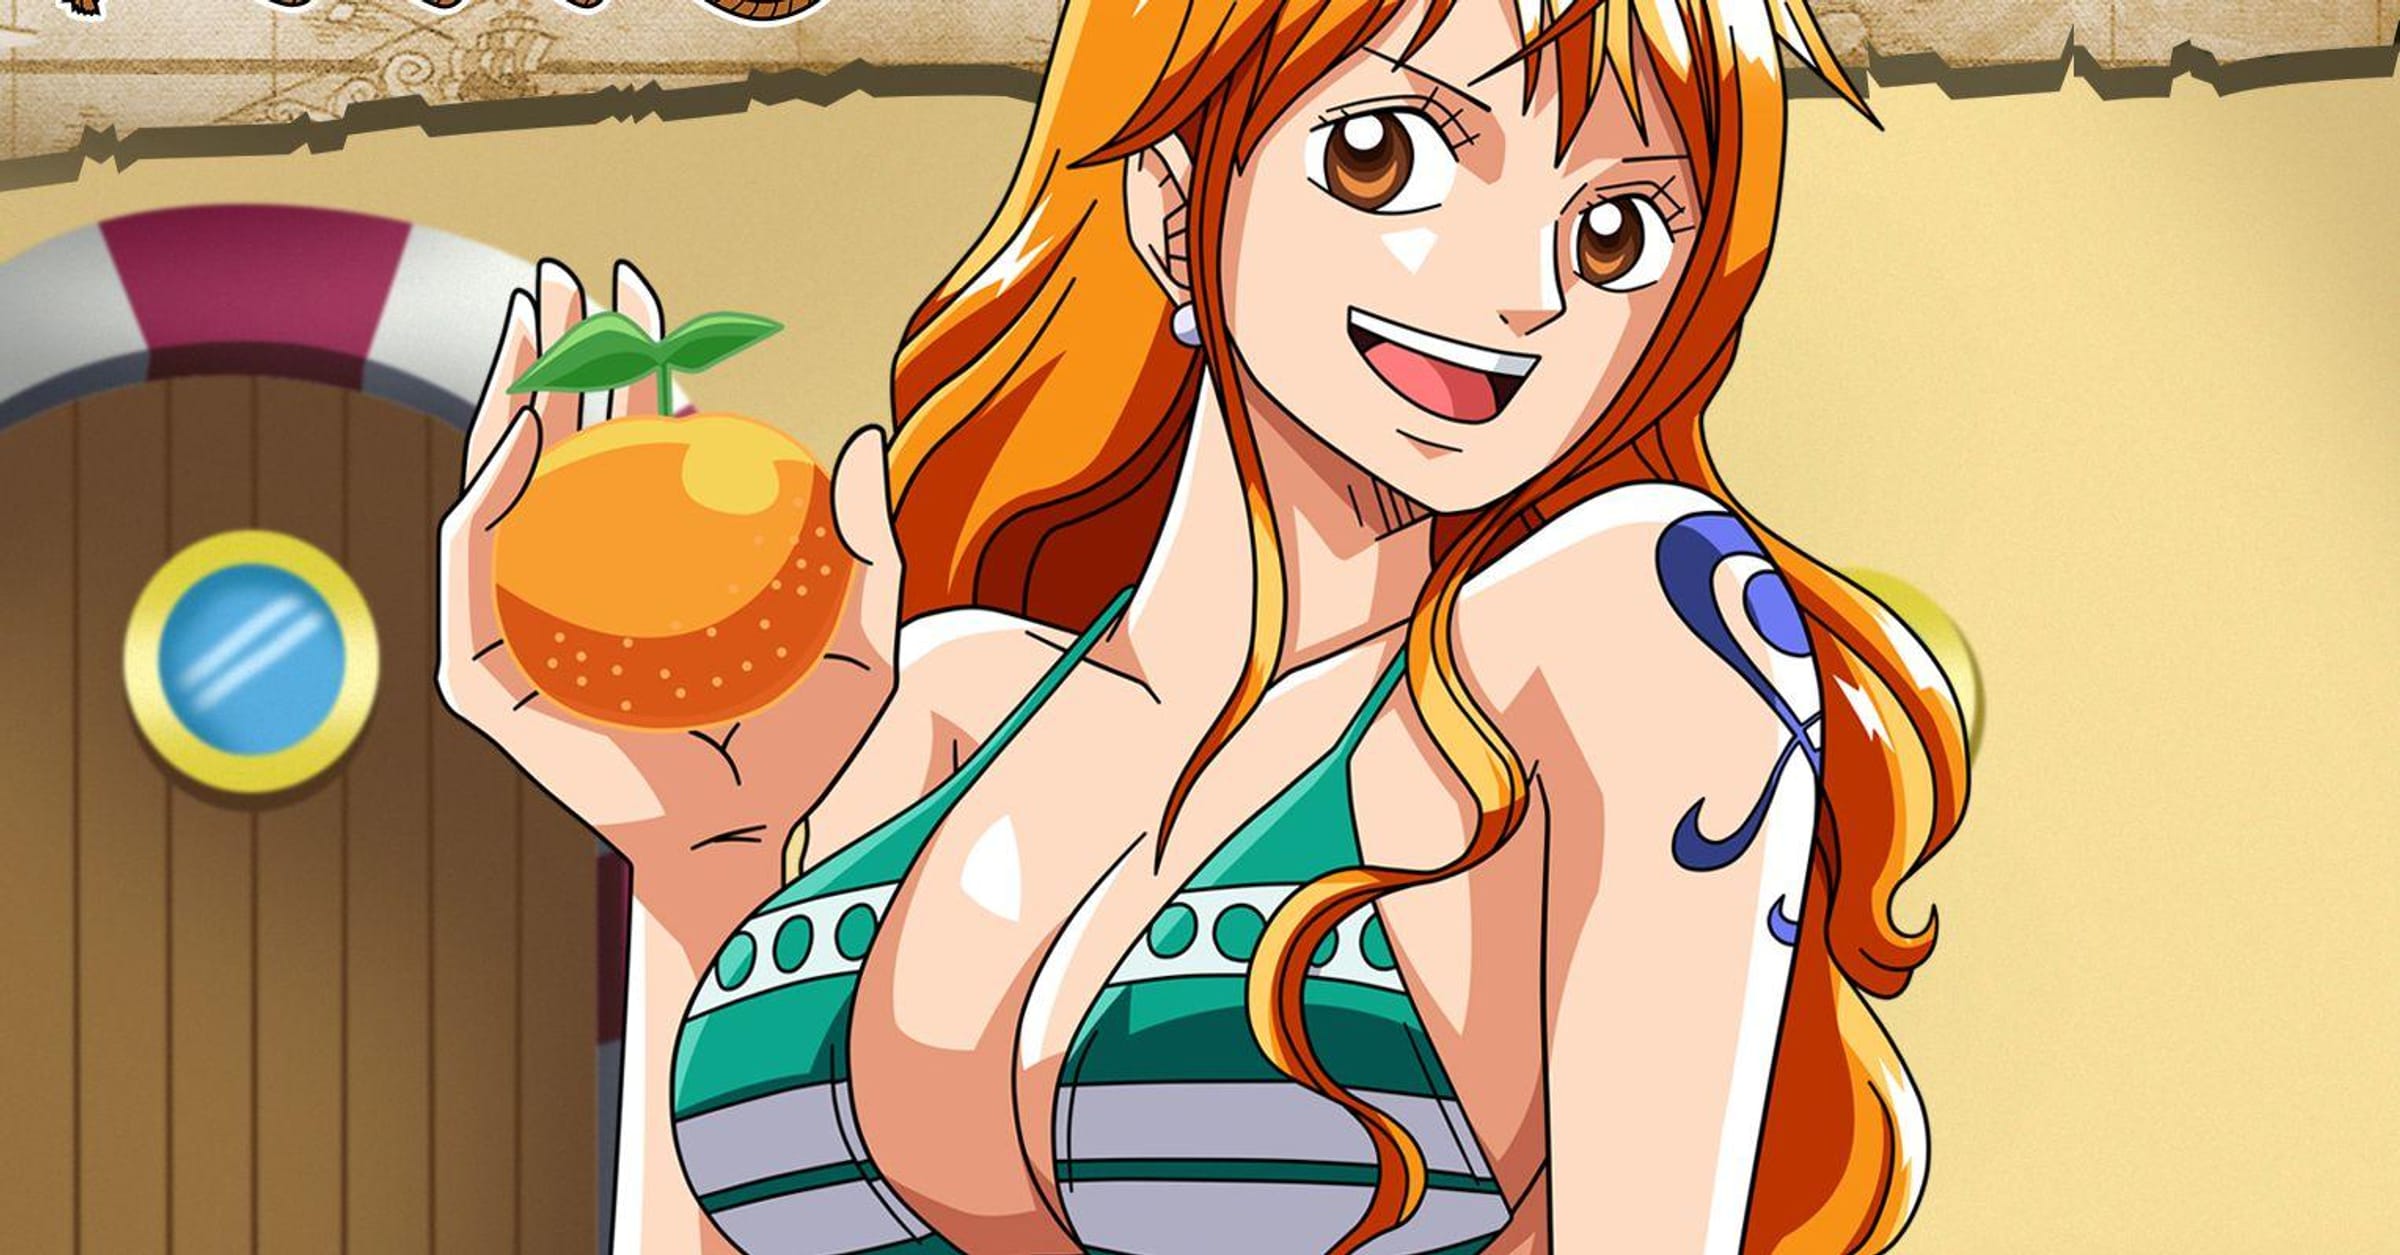 The 10 Best Female 'One Piece' Characters, Ranked